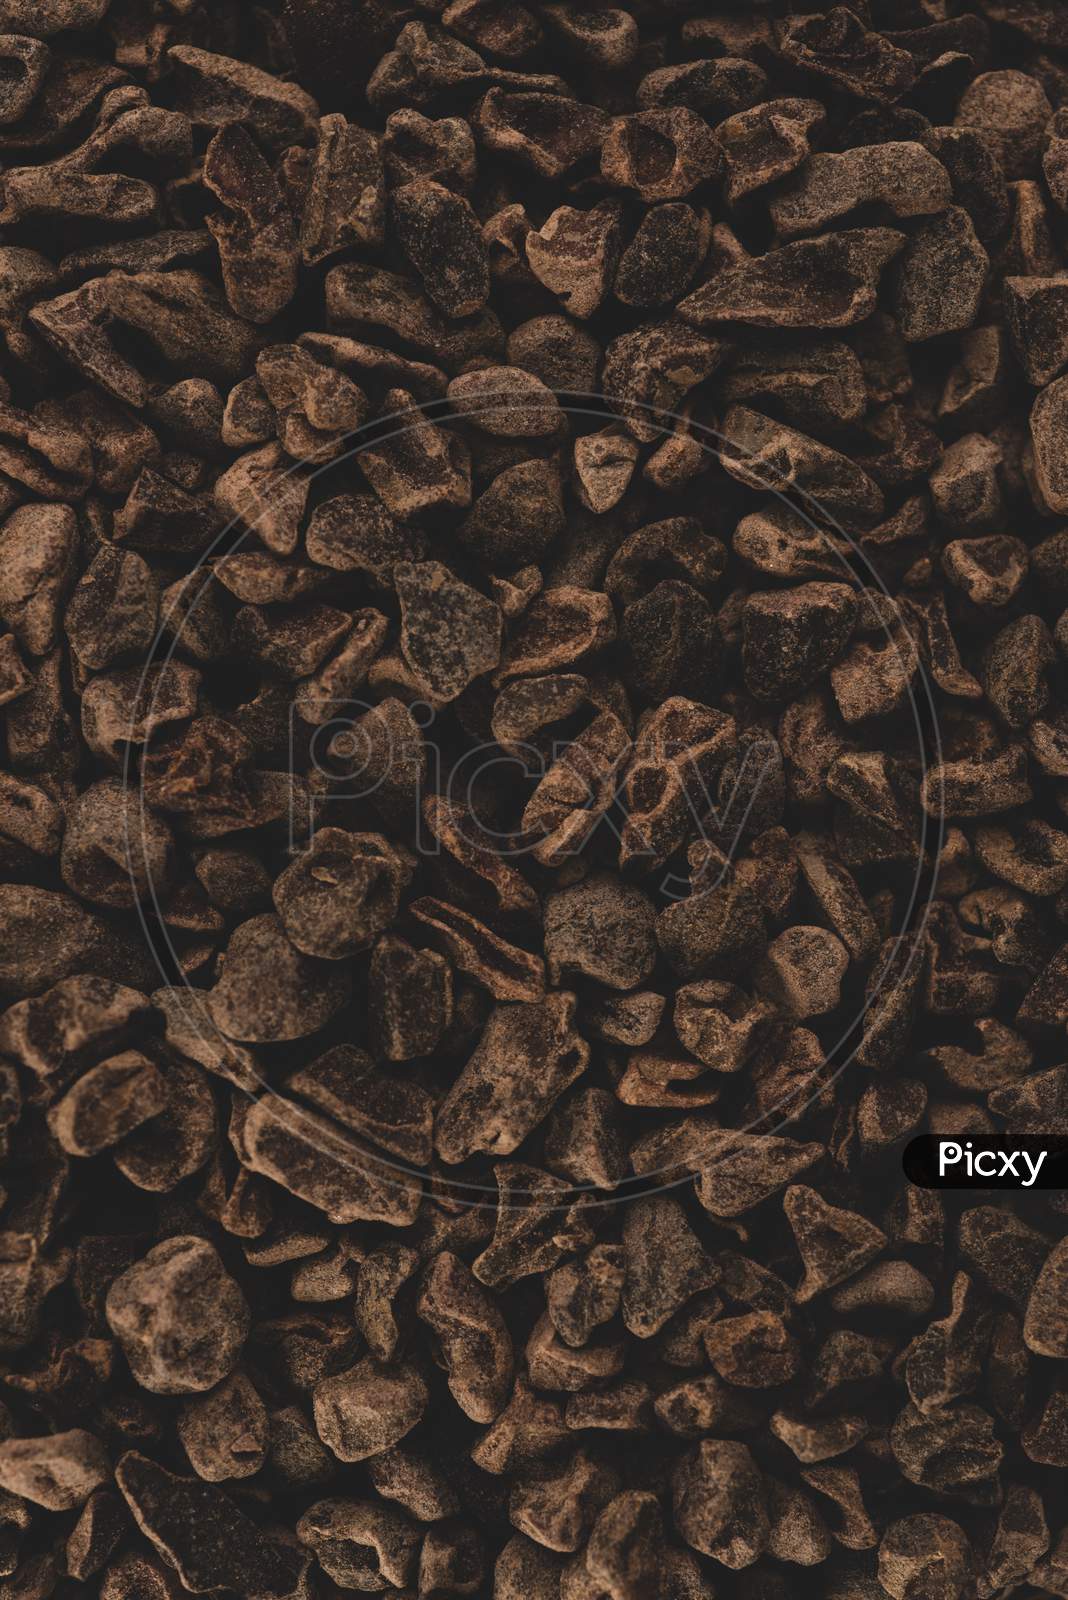 Macro Close Up Picture Of Raw Cacao Nibs